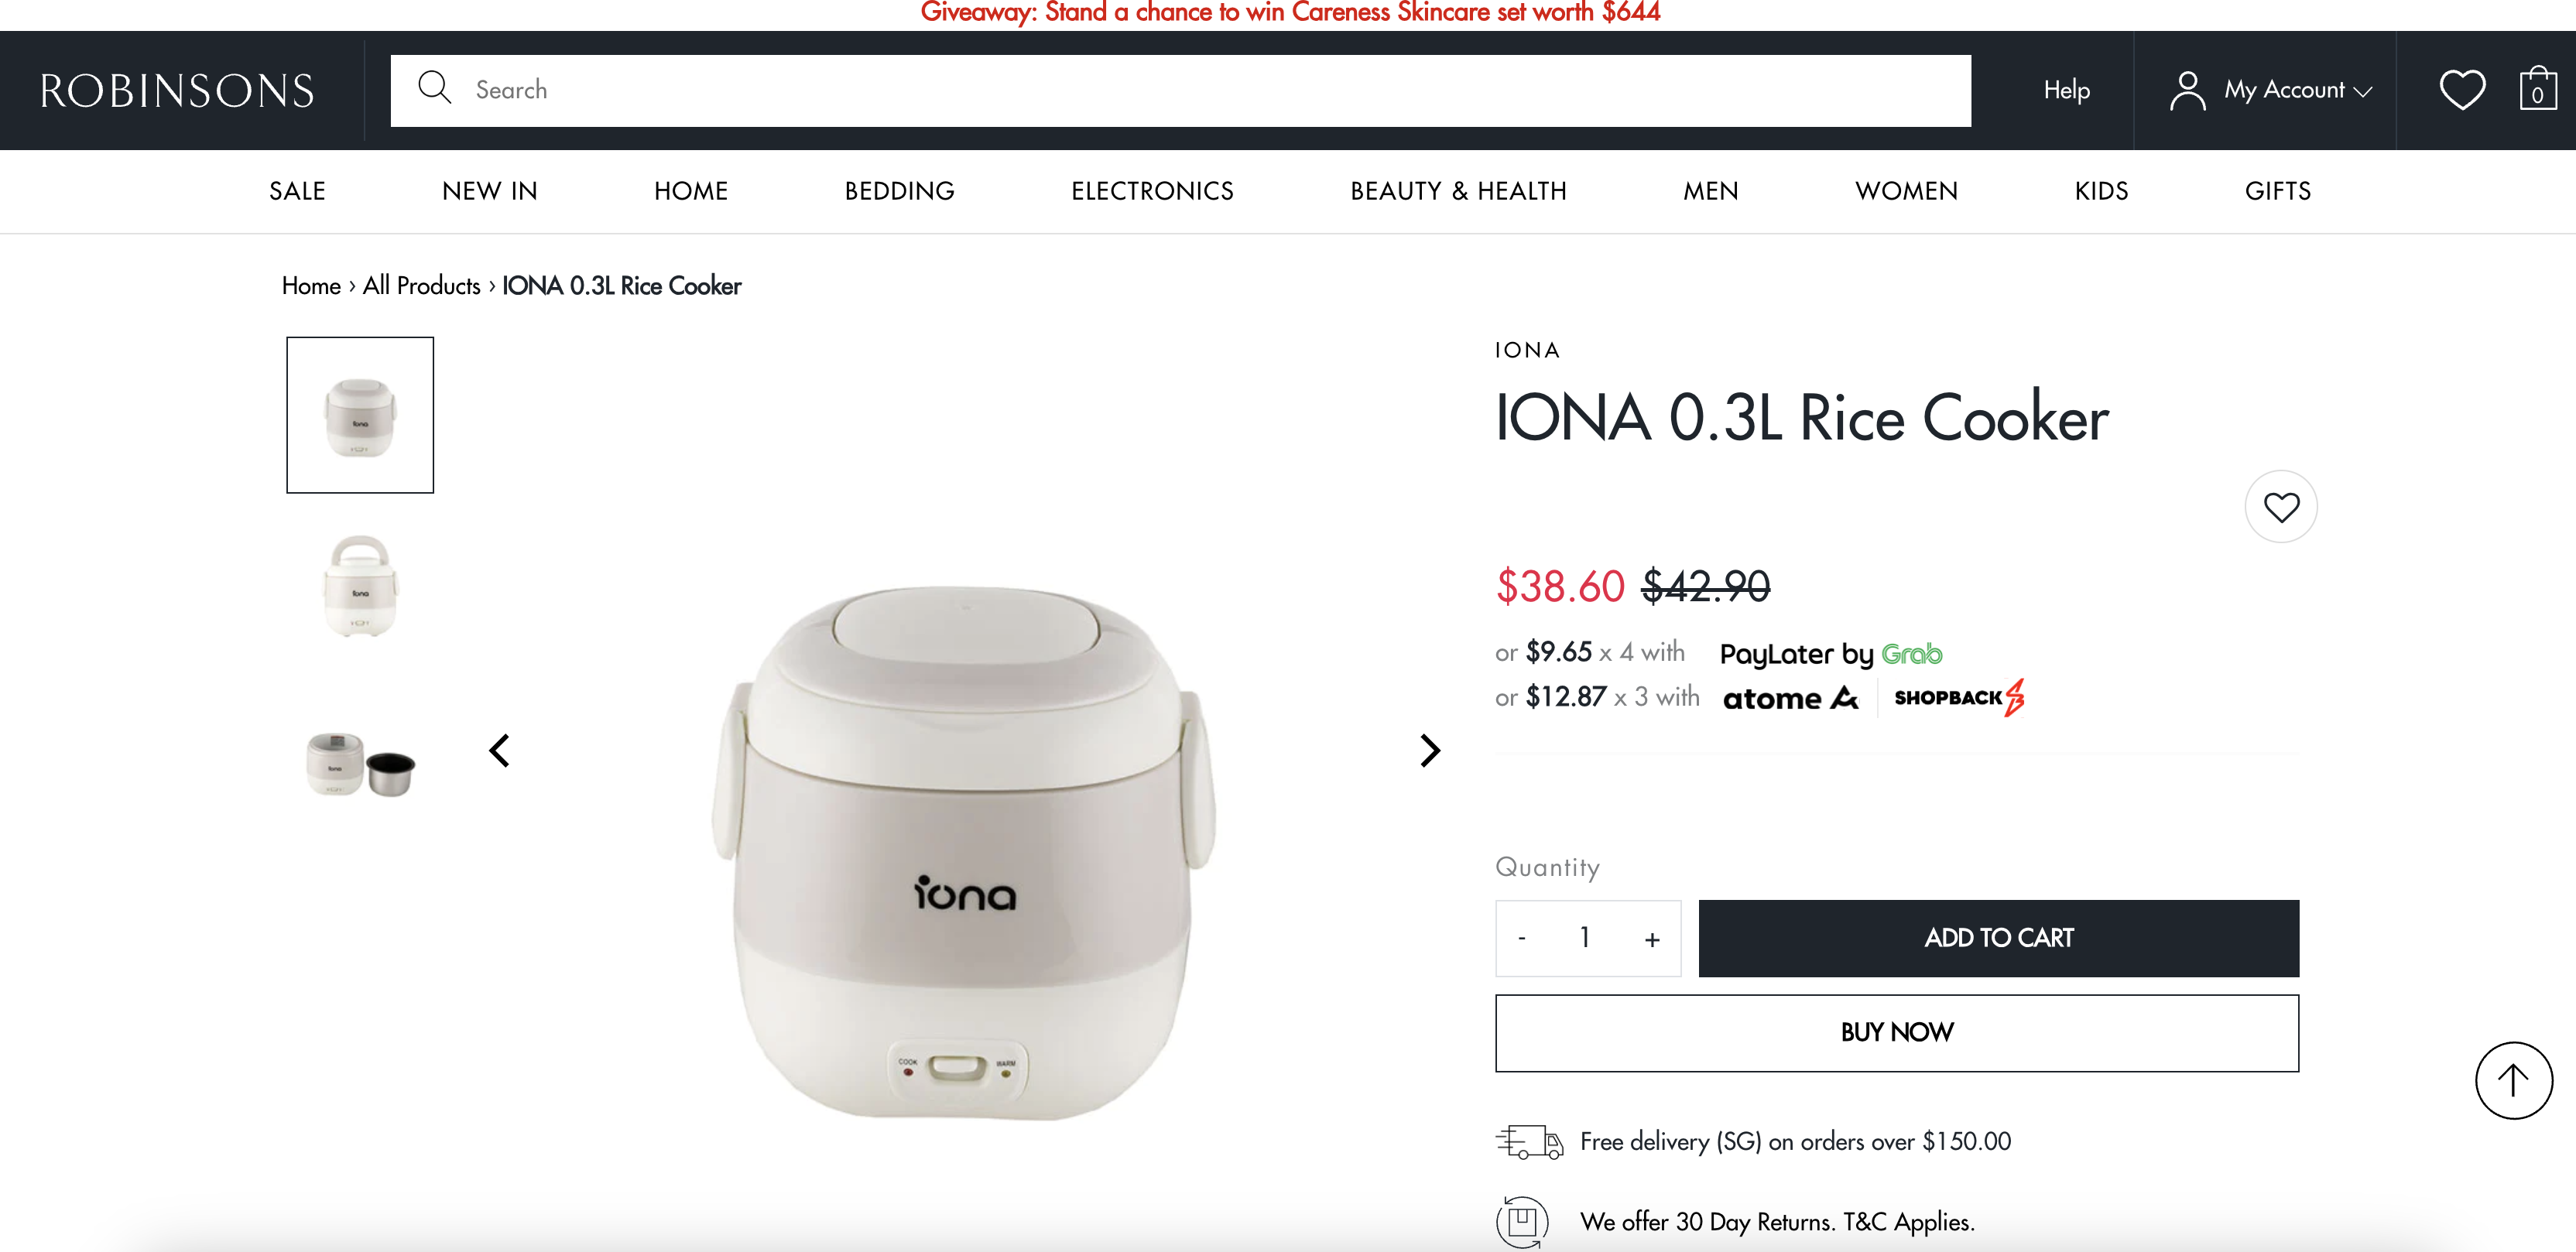 IONA 0.3L Rice Cooker